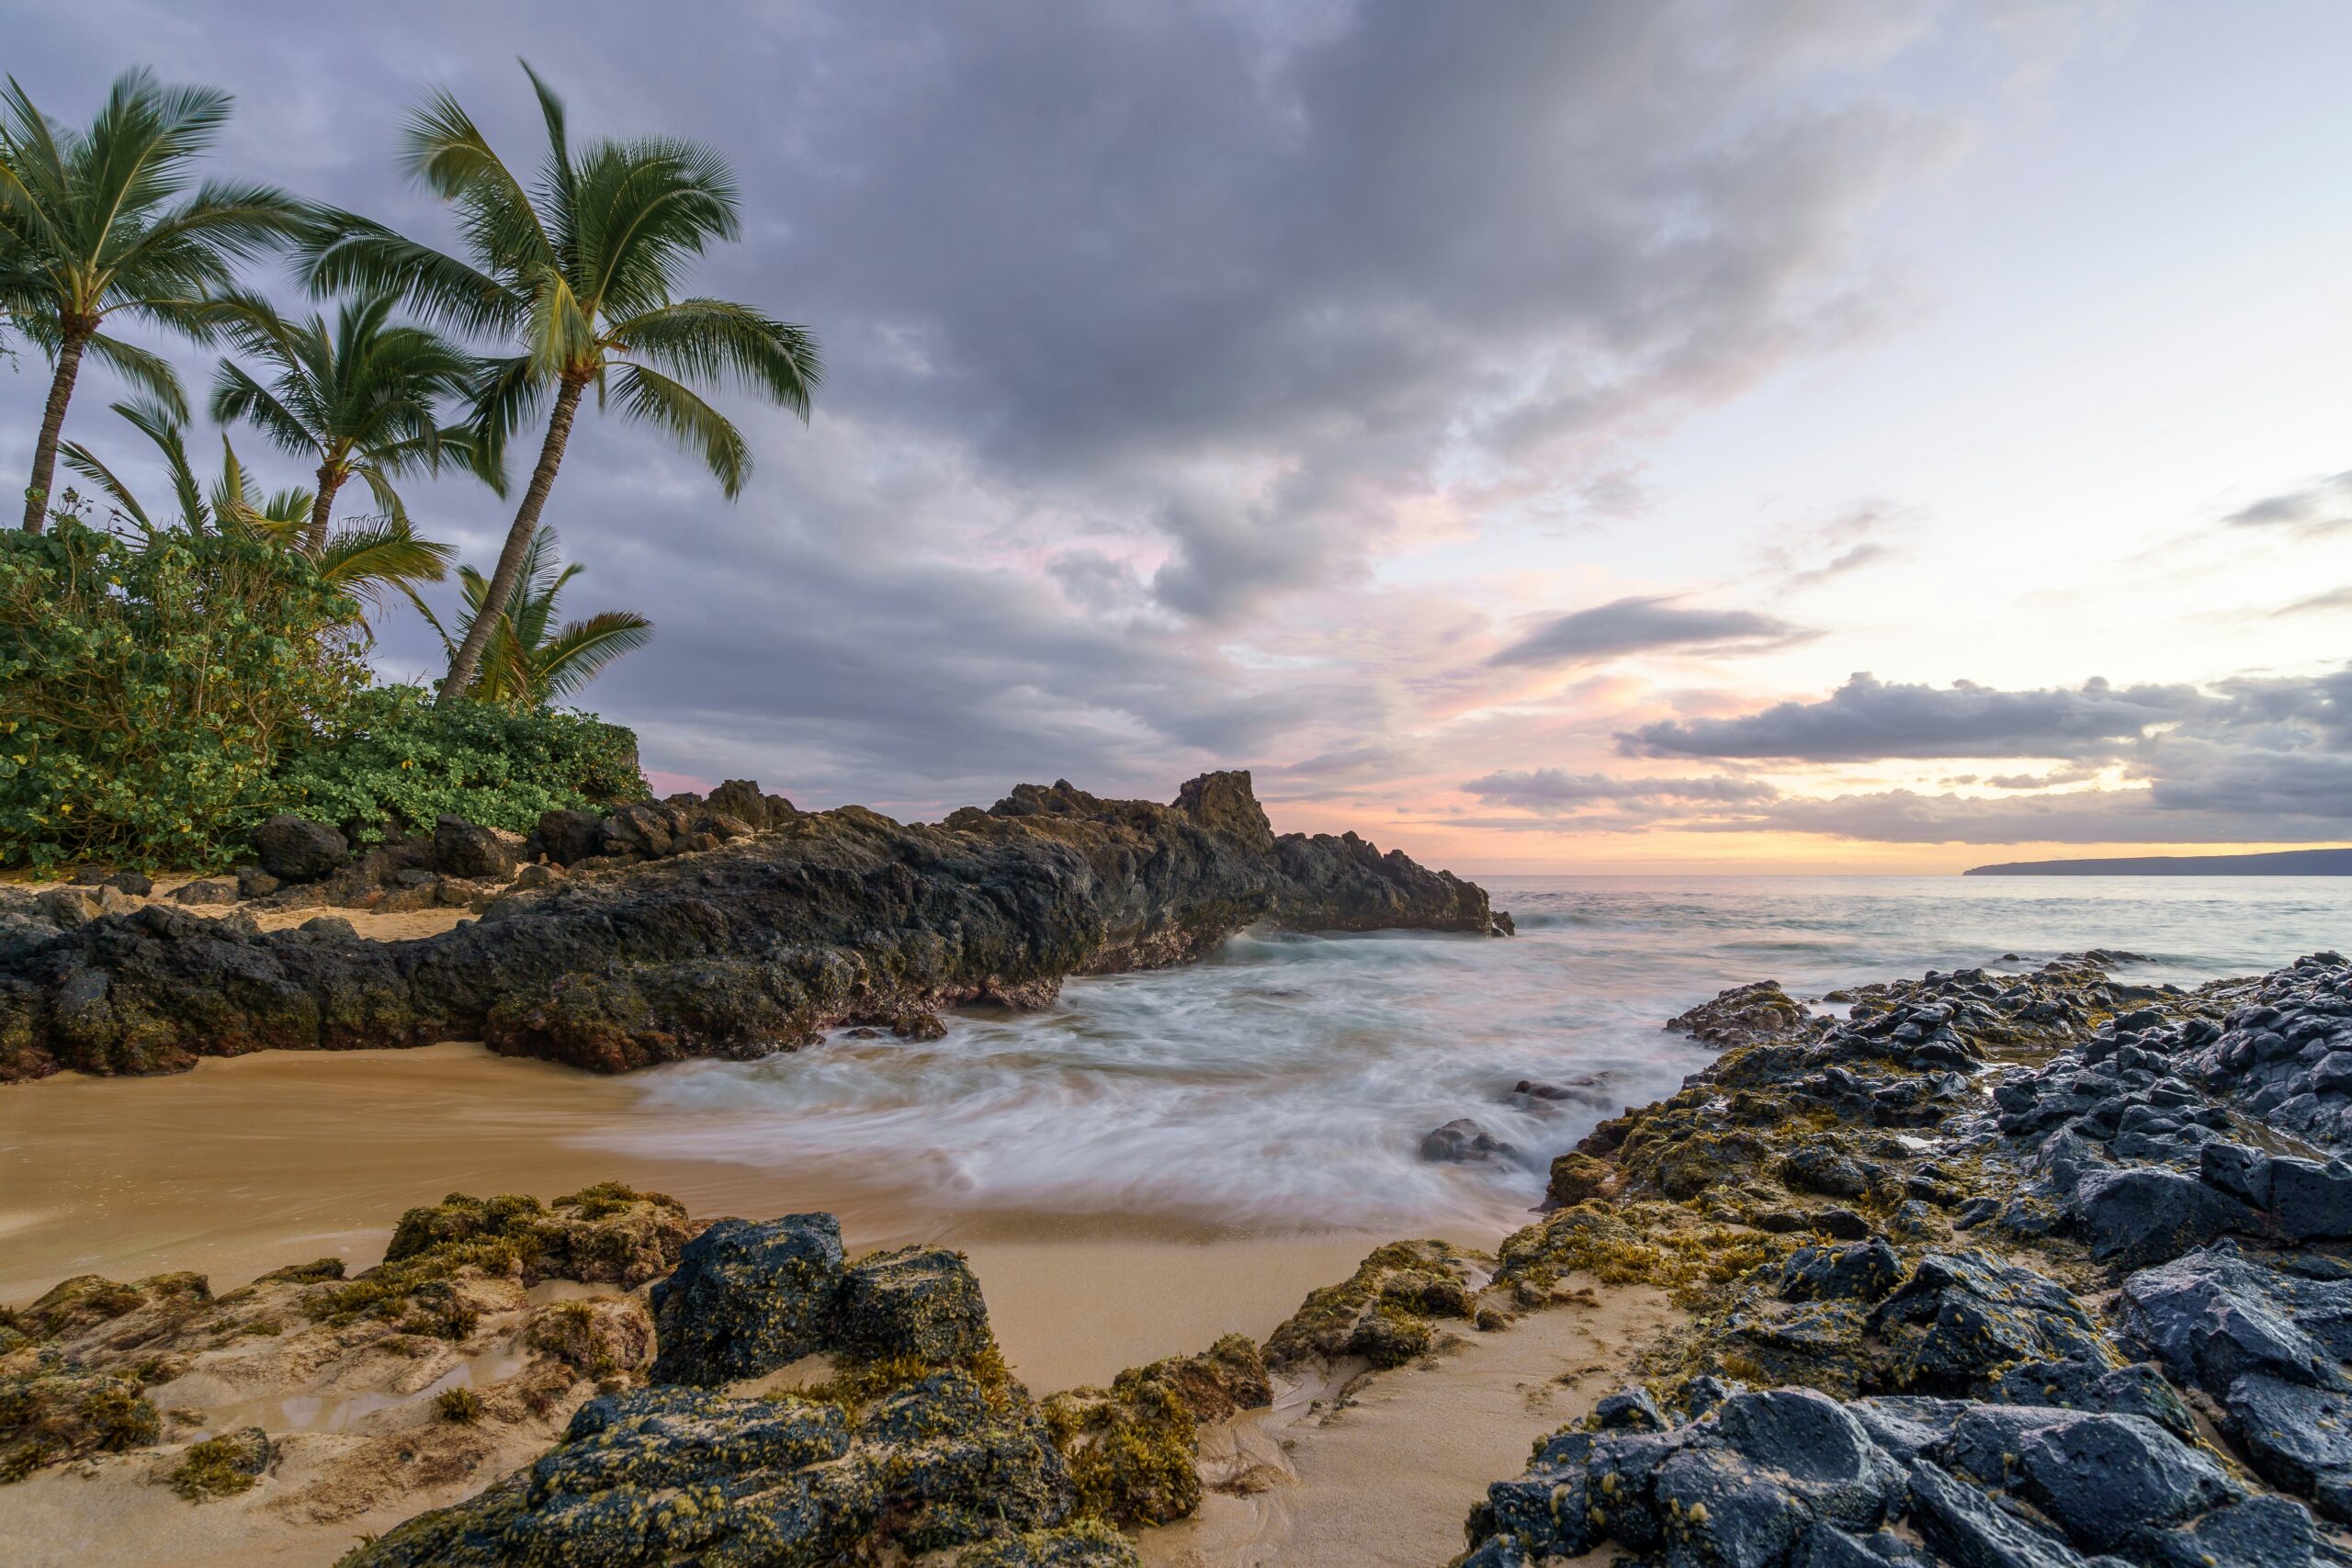 The beach with a view of the sunset in the background in Maui, HI